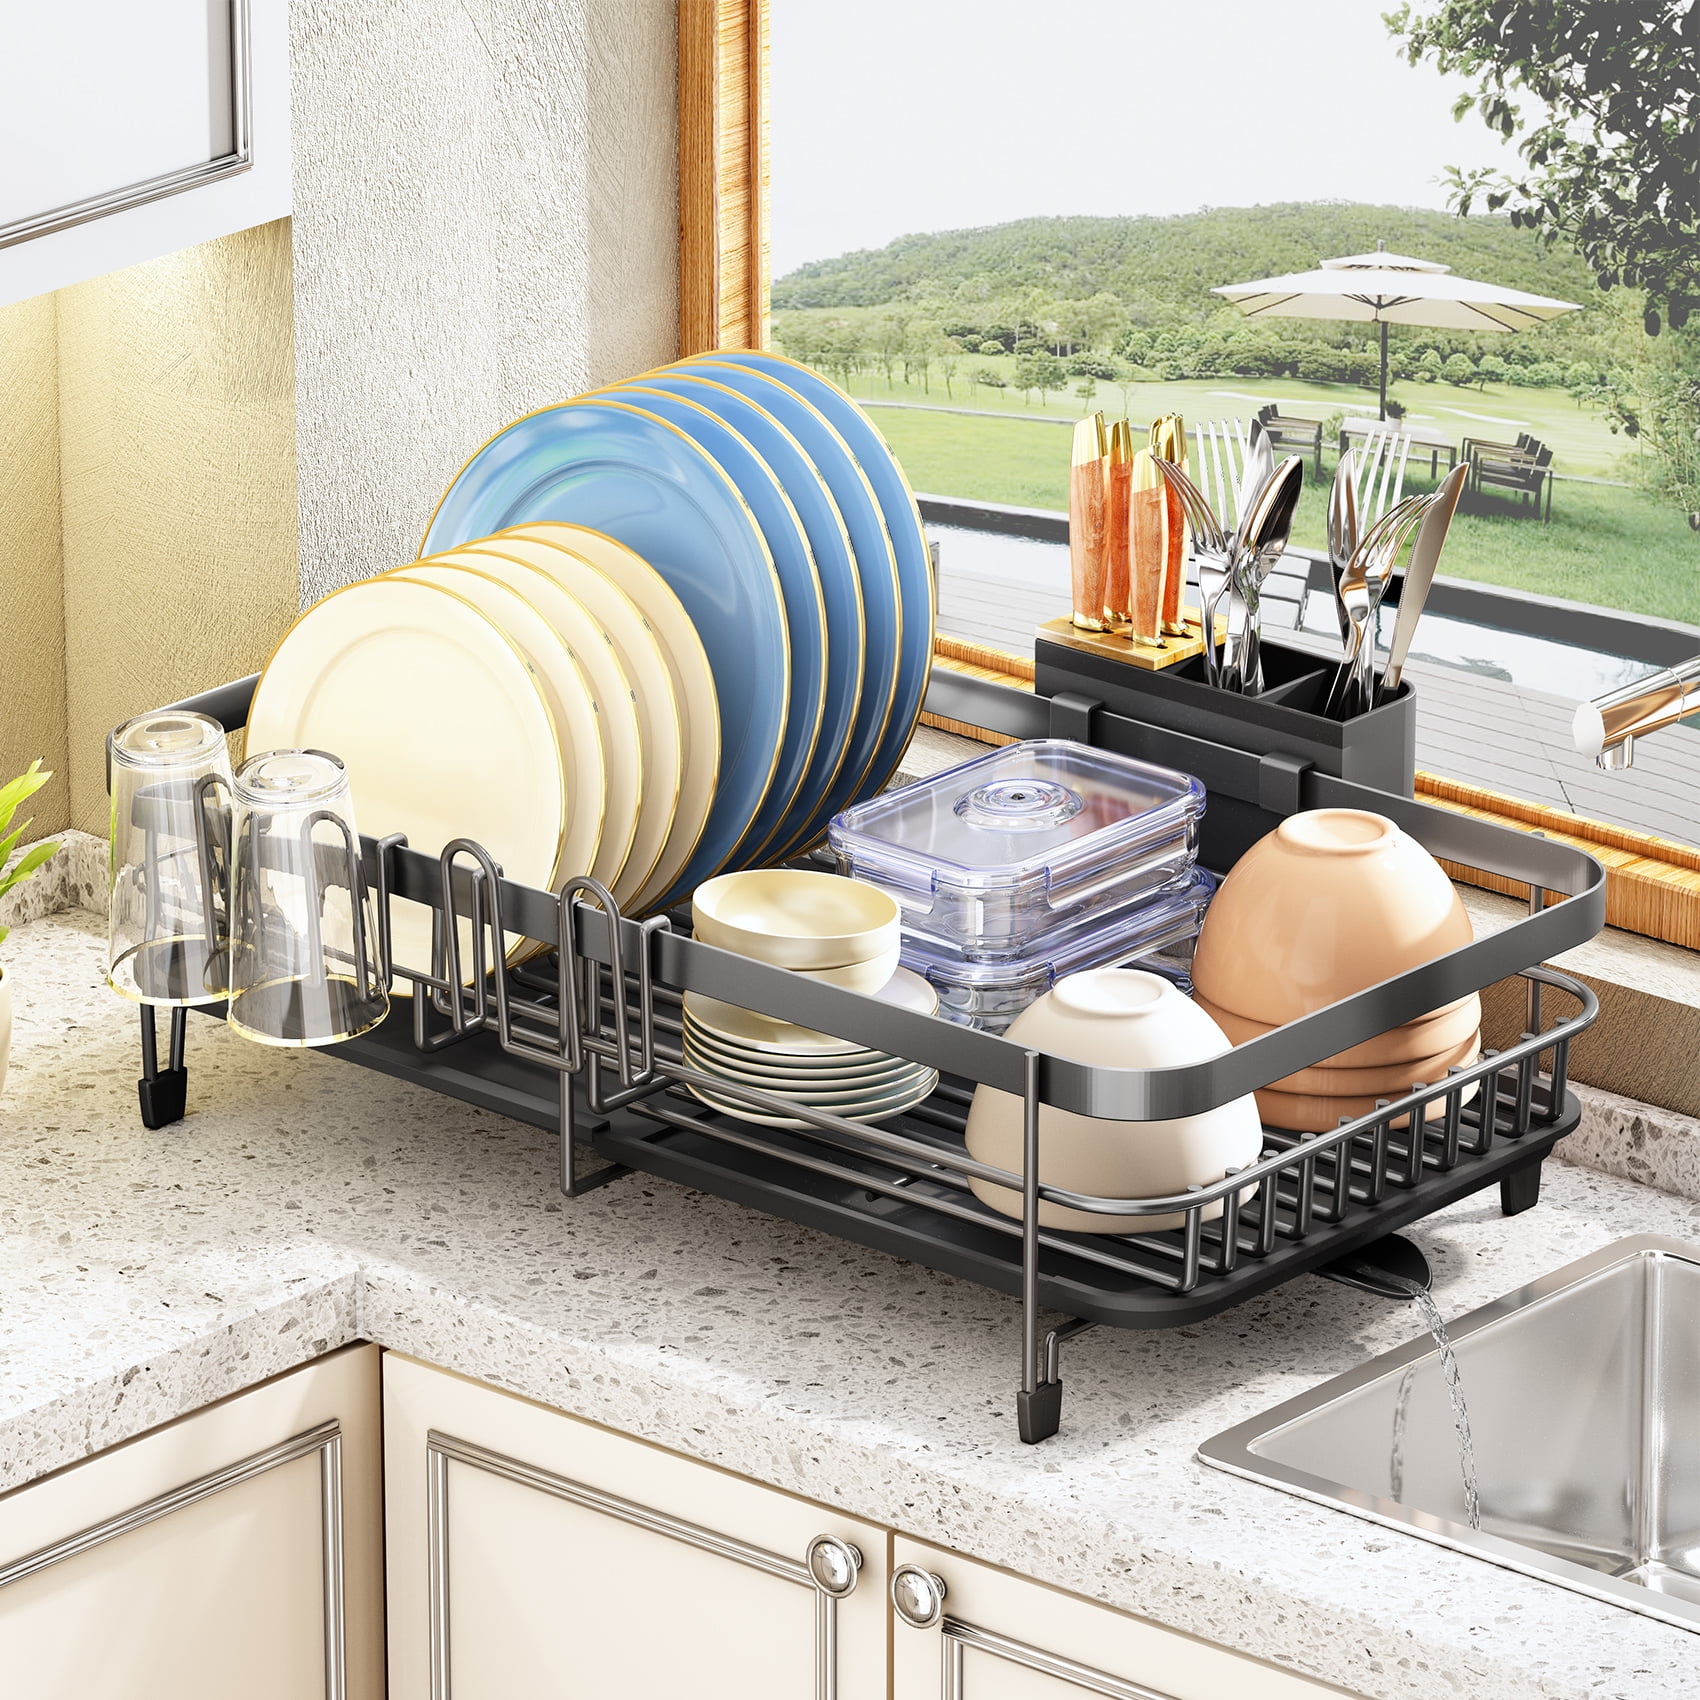 SAYZH Dish Drying Rack, Expandable(12.8-21.5) Dish Rack with Utensil  Holder Cup Holder, Stainless Steel Dish Rack and Drainboard Set for Kitchen